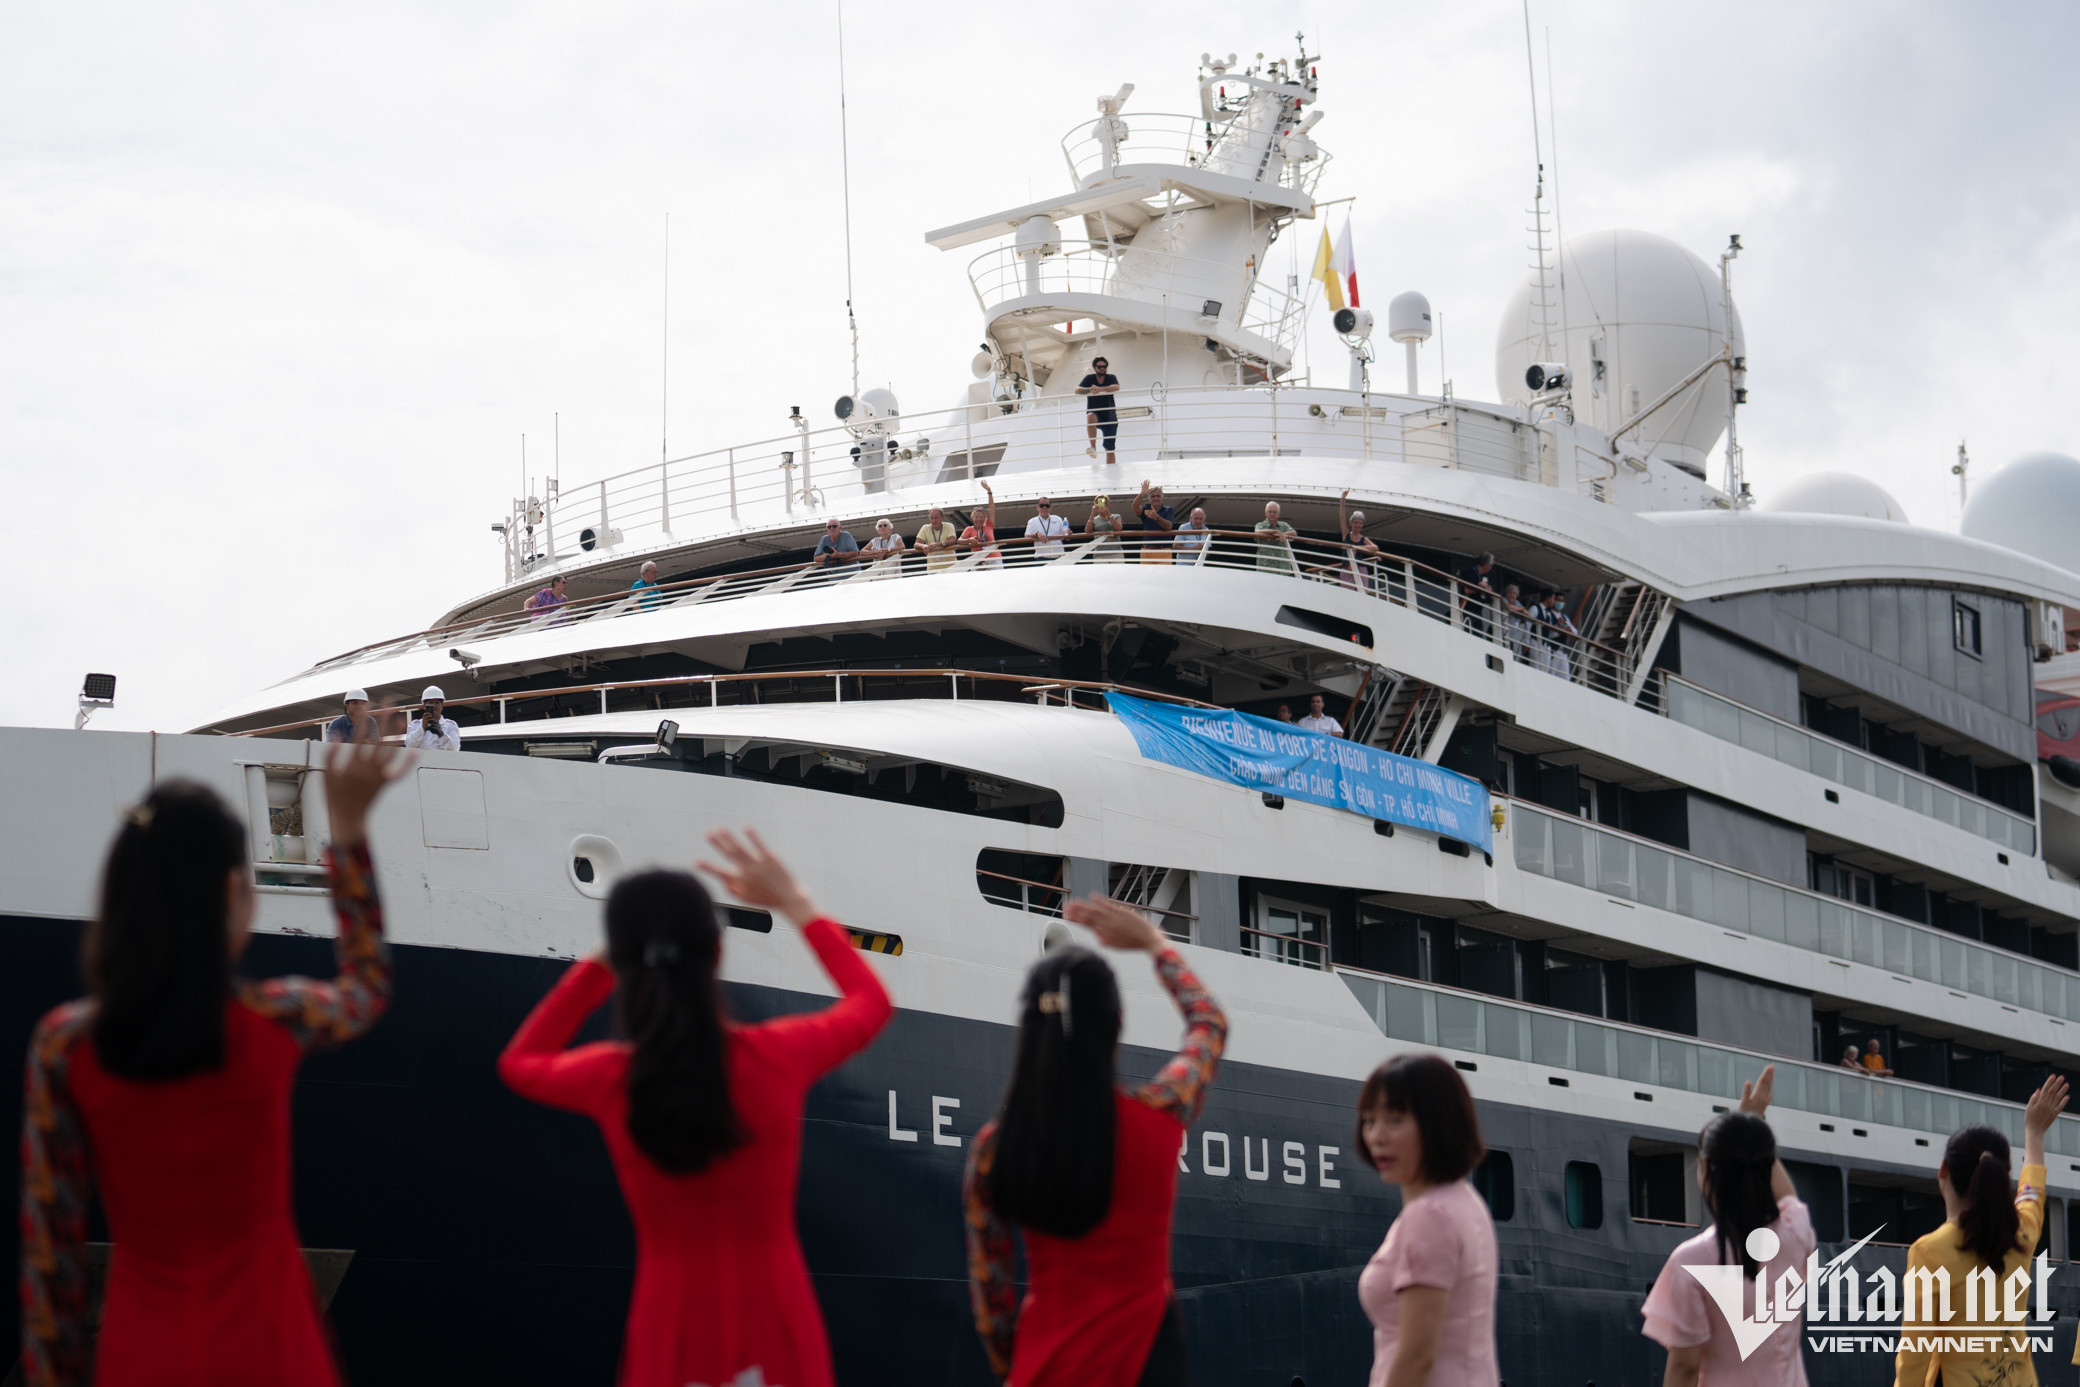 More international cruise ships arrive at Vietnam’s ports